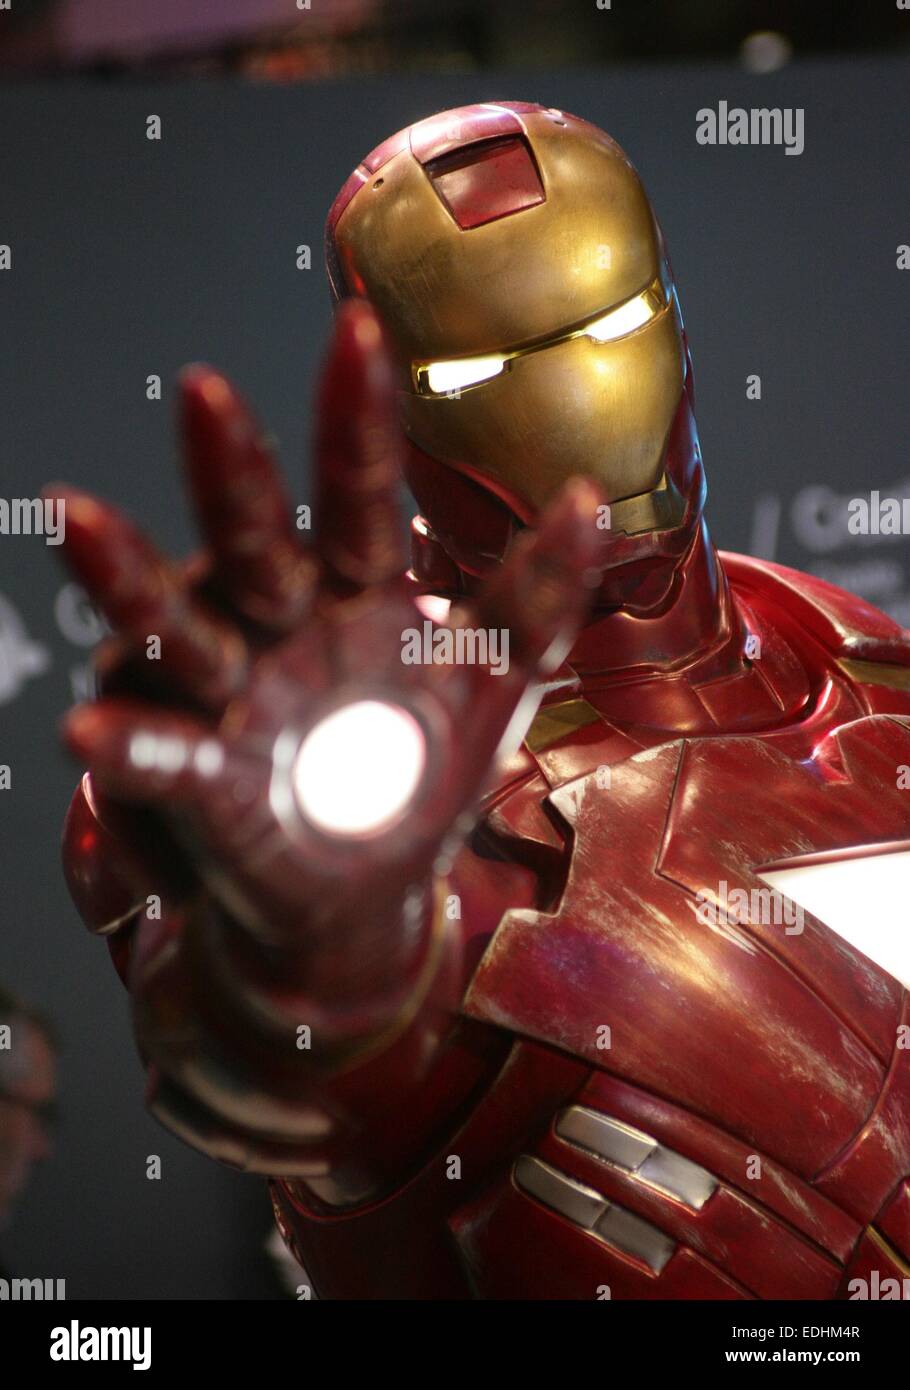 Las Vegas, NV, USA. 6th Jan, 2015. Iron Man, Samsung Galaxy and Marvel Comics booth in attendance for 2015 International CES Consumer Electronics Show - TUE, Las Vegas Convention Center, Las Vegas, NV January 6, 2015. Credit:  James Atoa/Everett Collection/Alamy Live News Stock Photo